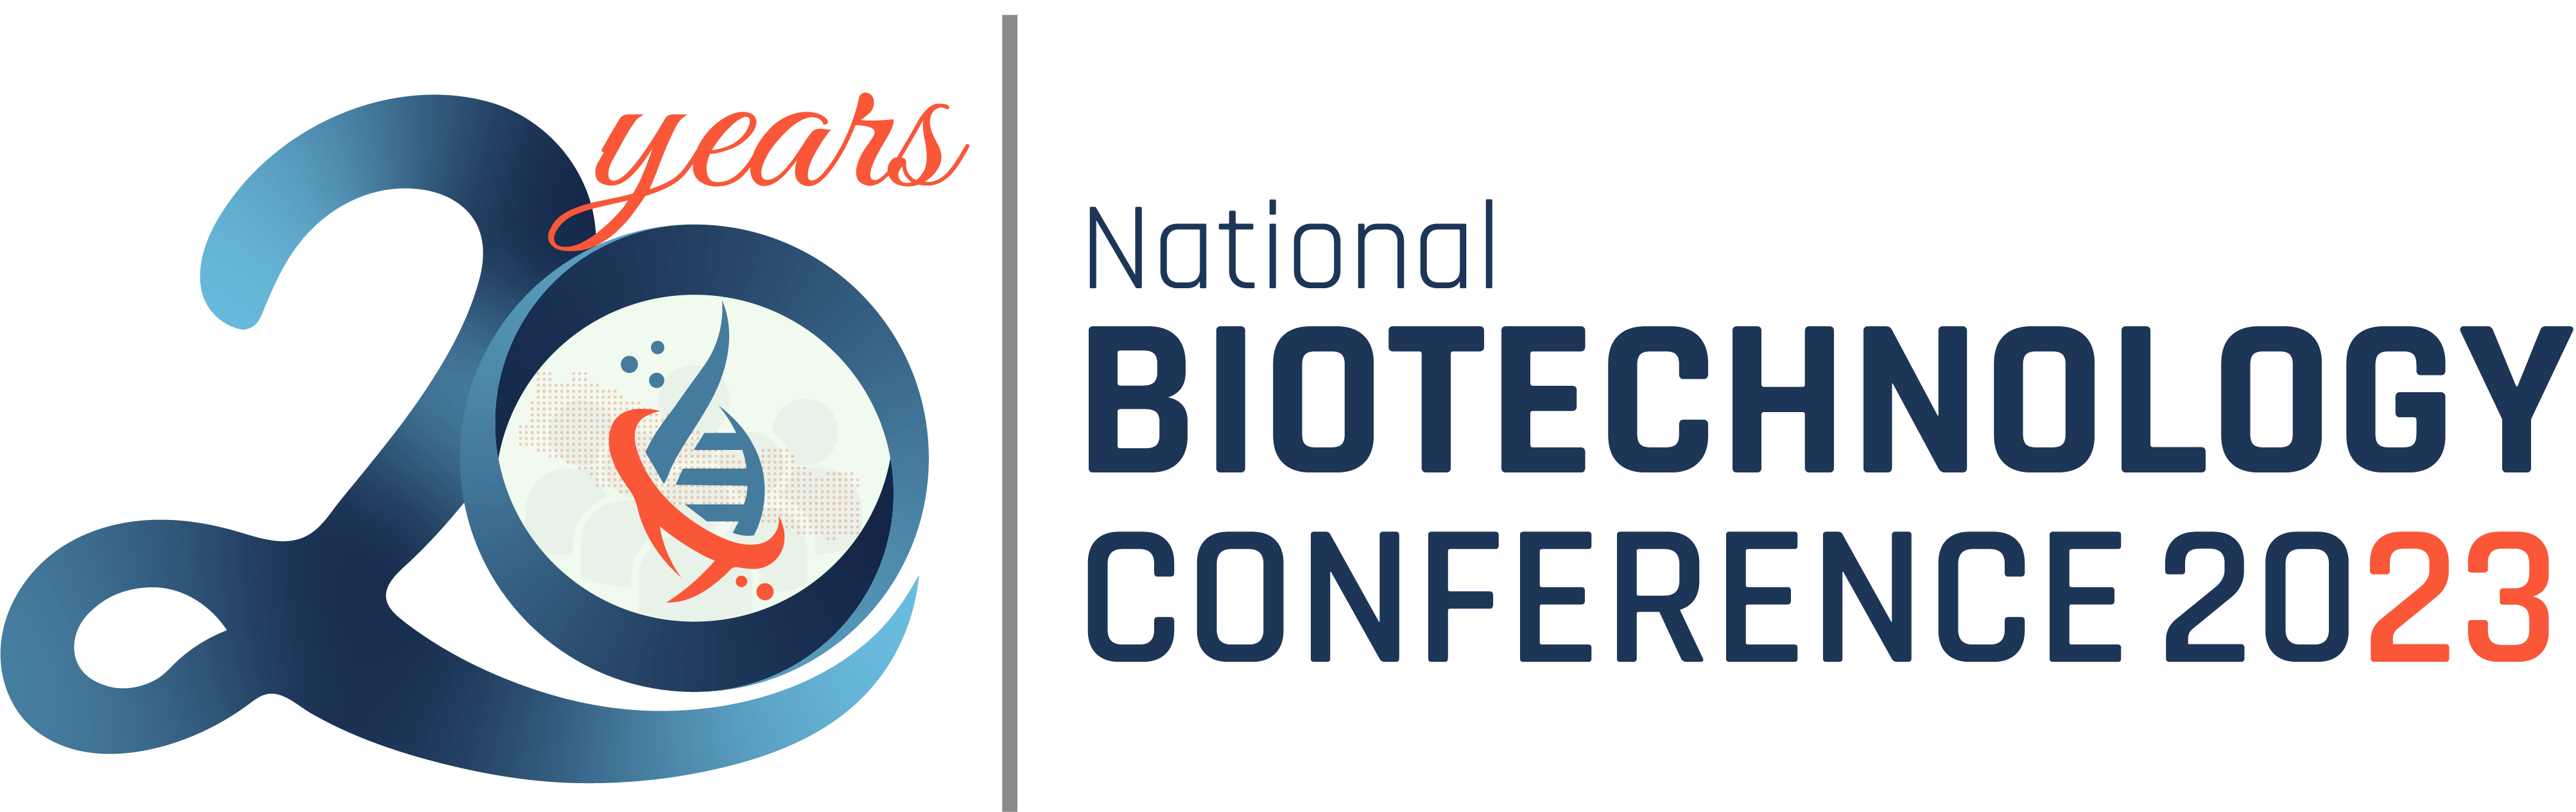 National Biotechnology Conference 2023 First National Biotechnology